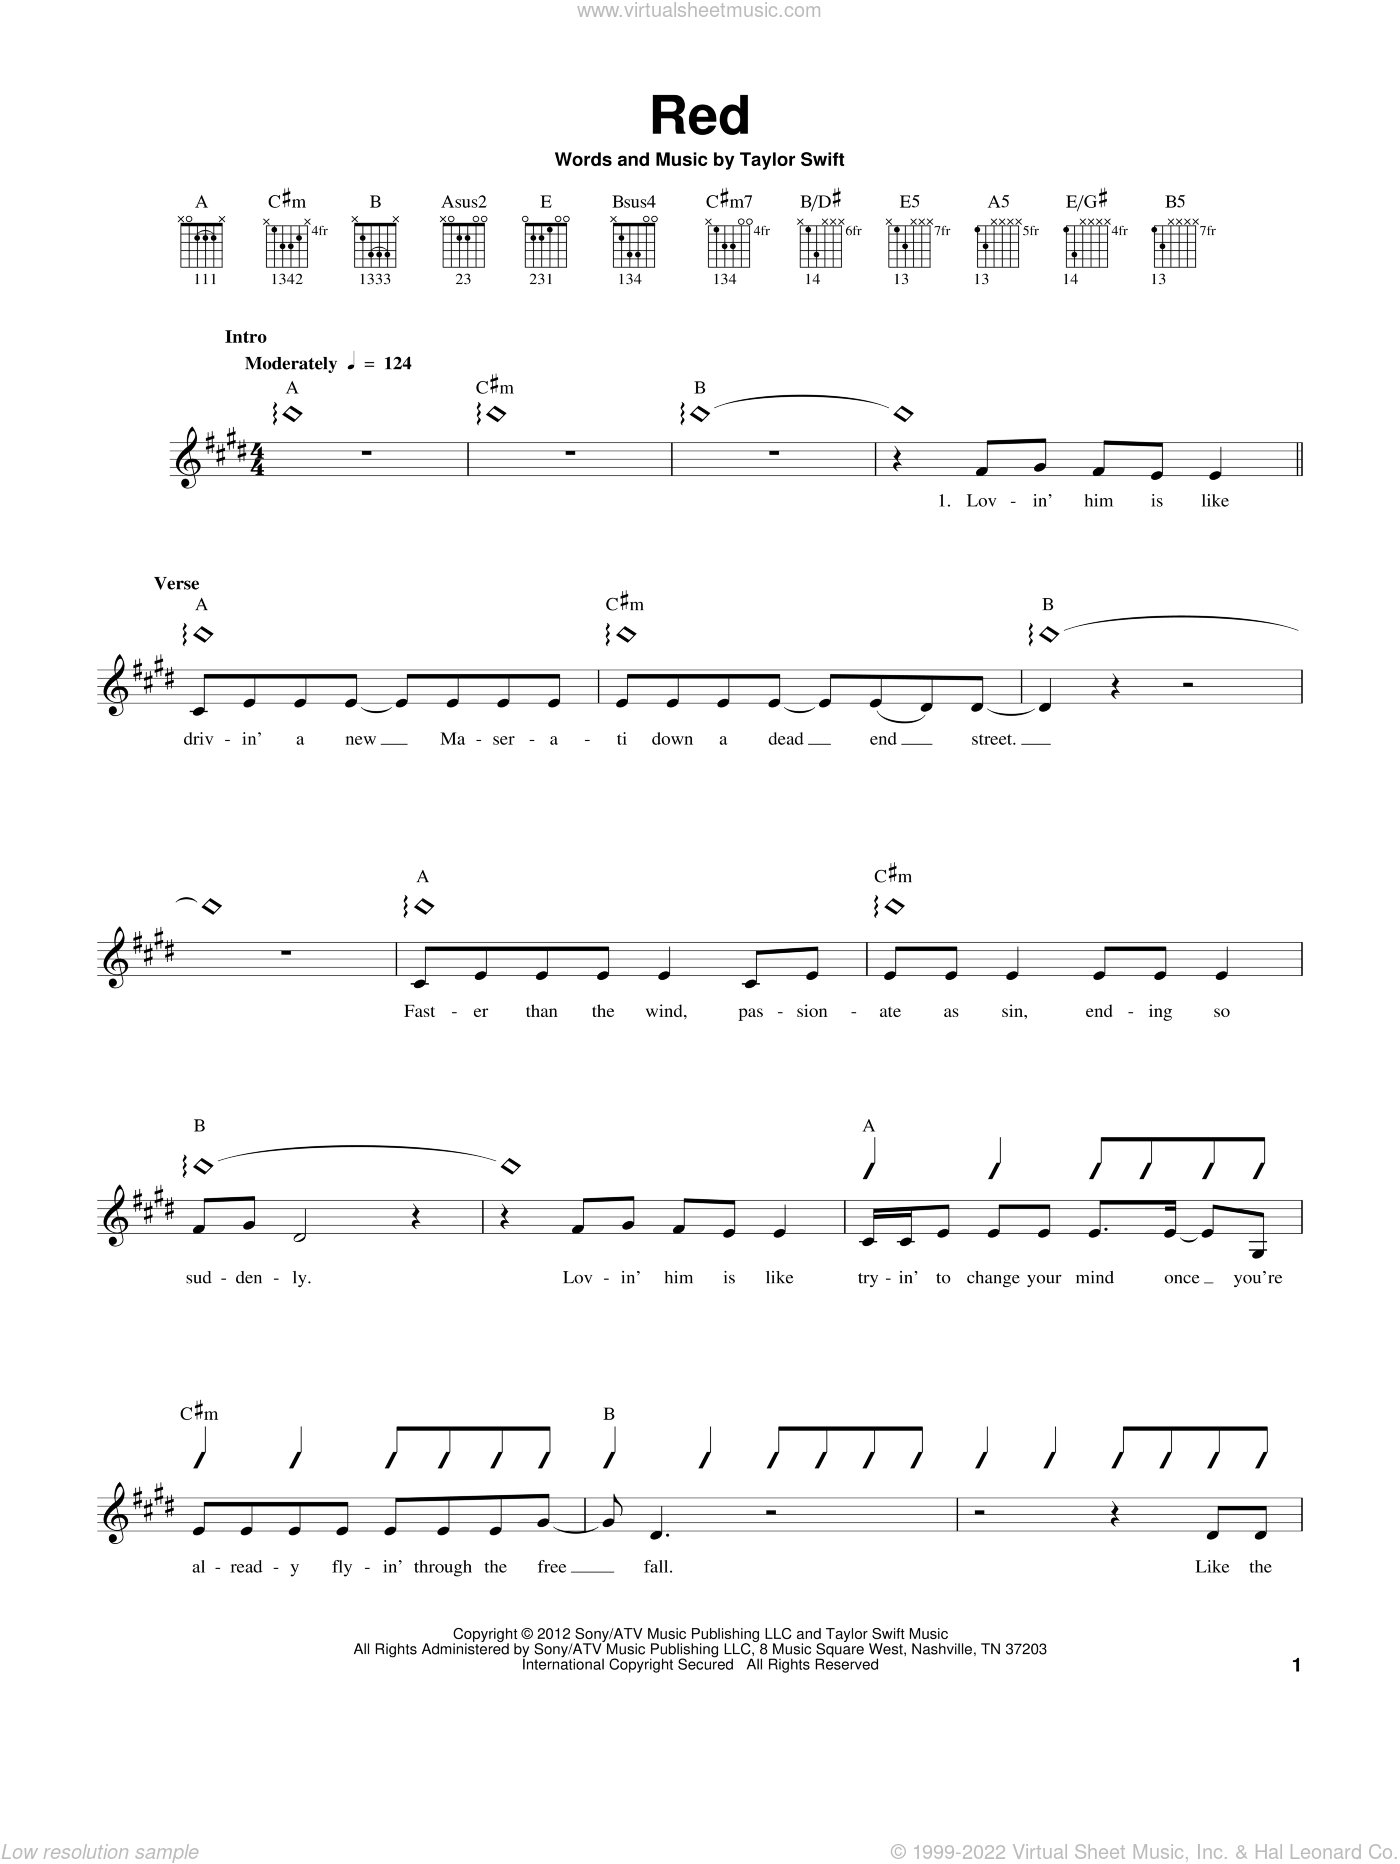 mean by taylor swift guitar chords